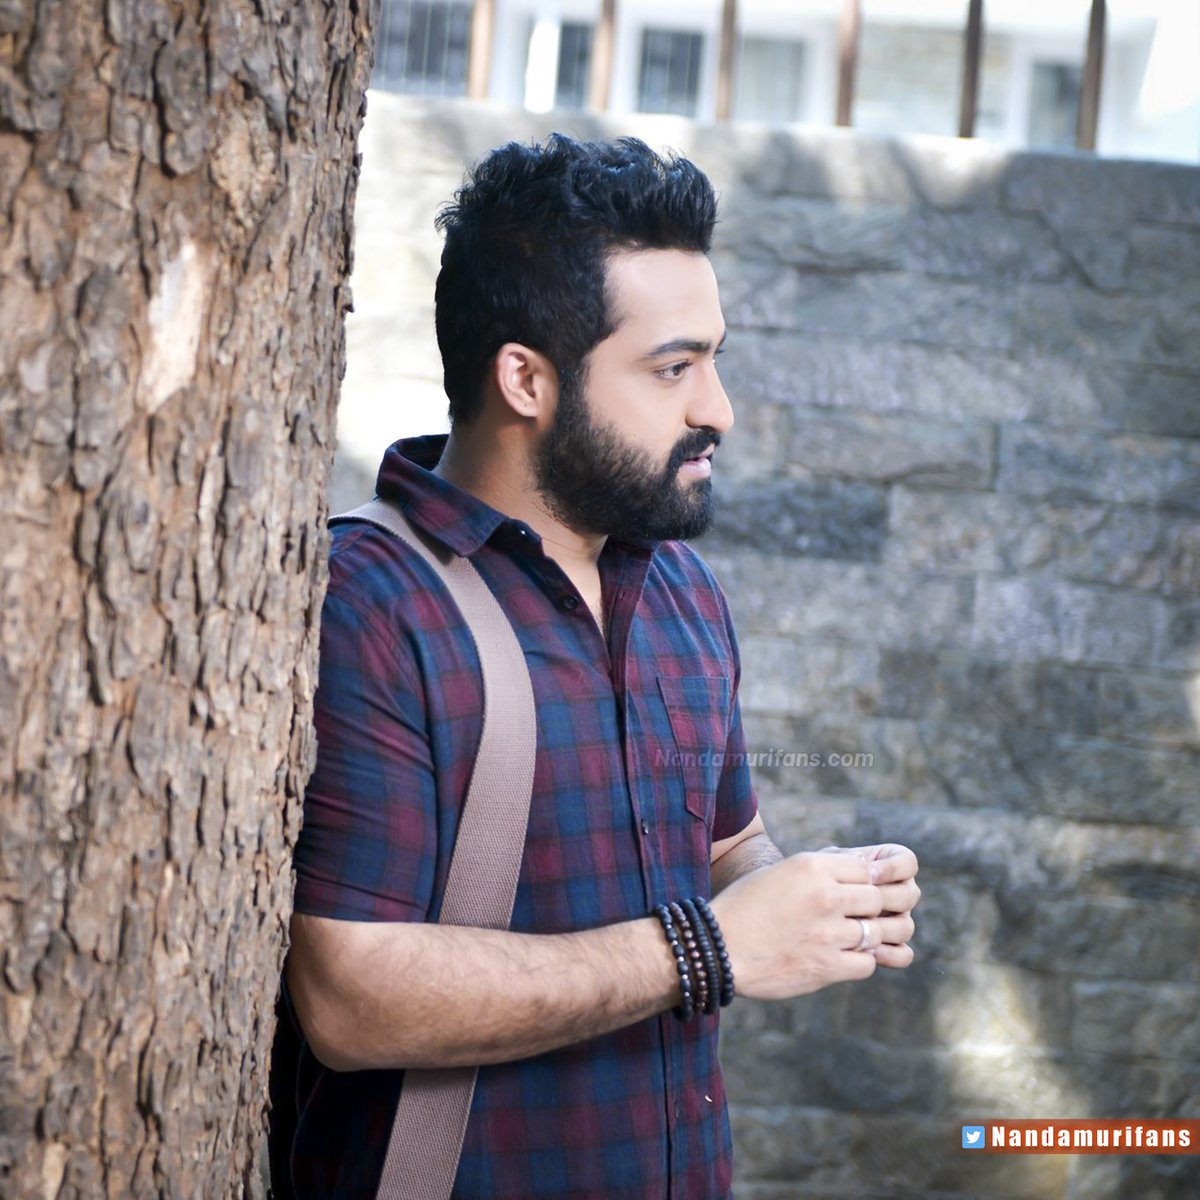 Jr NTR blends into his 3 characters! Now wants it for Bollywood